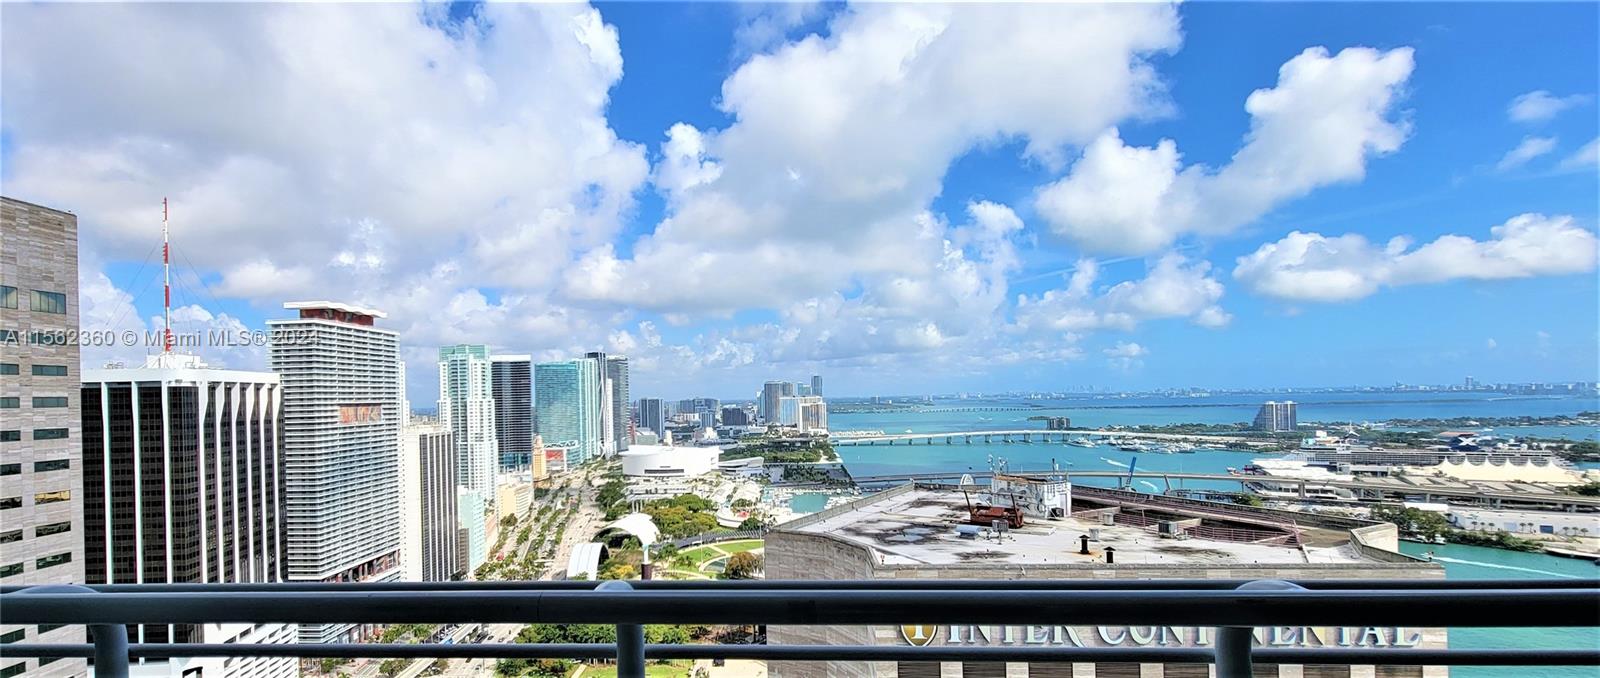 Exclusive Lower Penthouse condo with 2 Bedrooms, 2 Baths & high ceilings. Soak in all of Miami with expansive view of the Skyline, Bayside & Arena, Port of Miami, Private Islands & Miami Beach right from your balcony! Unit features laminate wood floors throughout, marble bathroom counters, granite kitchen countertops and impact doors and windows to ensure a quiet retreat amidst bustling downtown. A waterfront stroll or jog along the river or a soothing ocean front yoga class are just an elevator ride down from the manned lobby. Situated at the edge of Biscayne Blvd & the Miami River, One Miami offers 2 pools, 2 gyms, party room, conference room, sauna, jacuzzi, 24-hr security guard gate, valet, concierge & onsite management office. HOA fees include water, internet & basic cable.